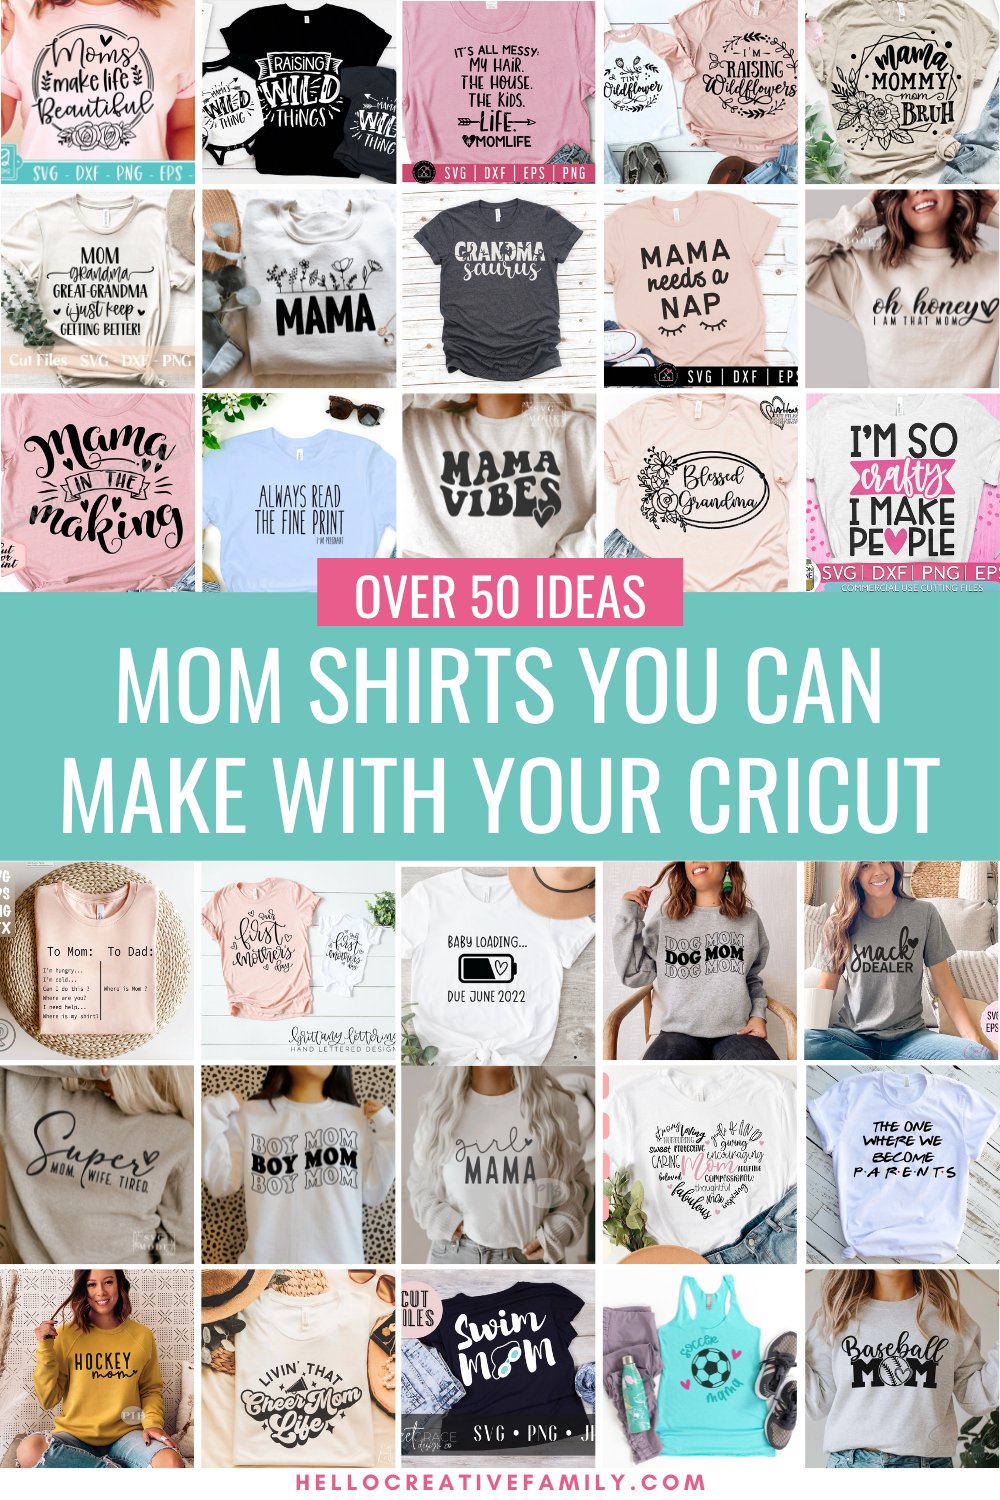 Get inspired! We've collected over 50 DIY Mom Shirt SVG files that you can make with your Cricut Maker, Cricut Explore, Cricut Joy, Silhouette Cameo or other electronic cutting machine! From funny mom shirts, to sweet mom shirts, to sport mom shirts, to pregnant and new mom shirts and even grandma shirts! We've got a ton of great ideas for Mother's Day, Christmas, birthdays or any time of the year you want to celebrate the best mom ever!